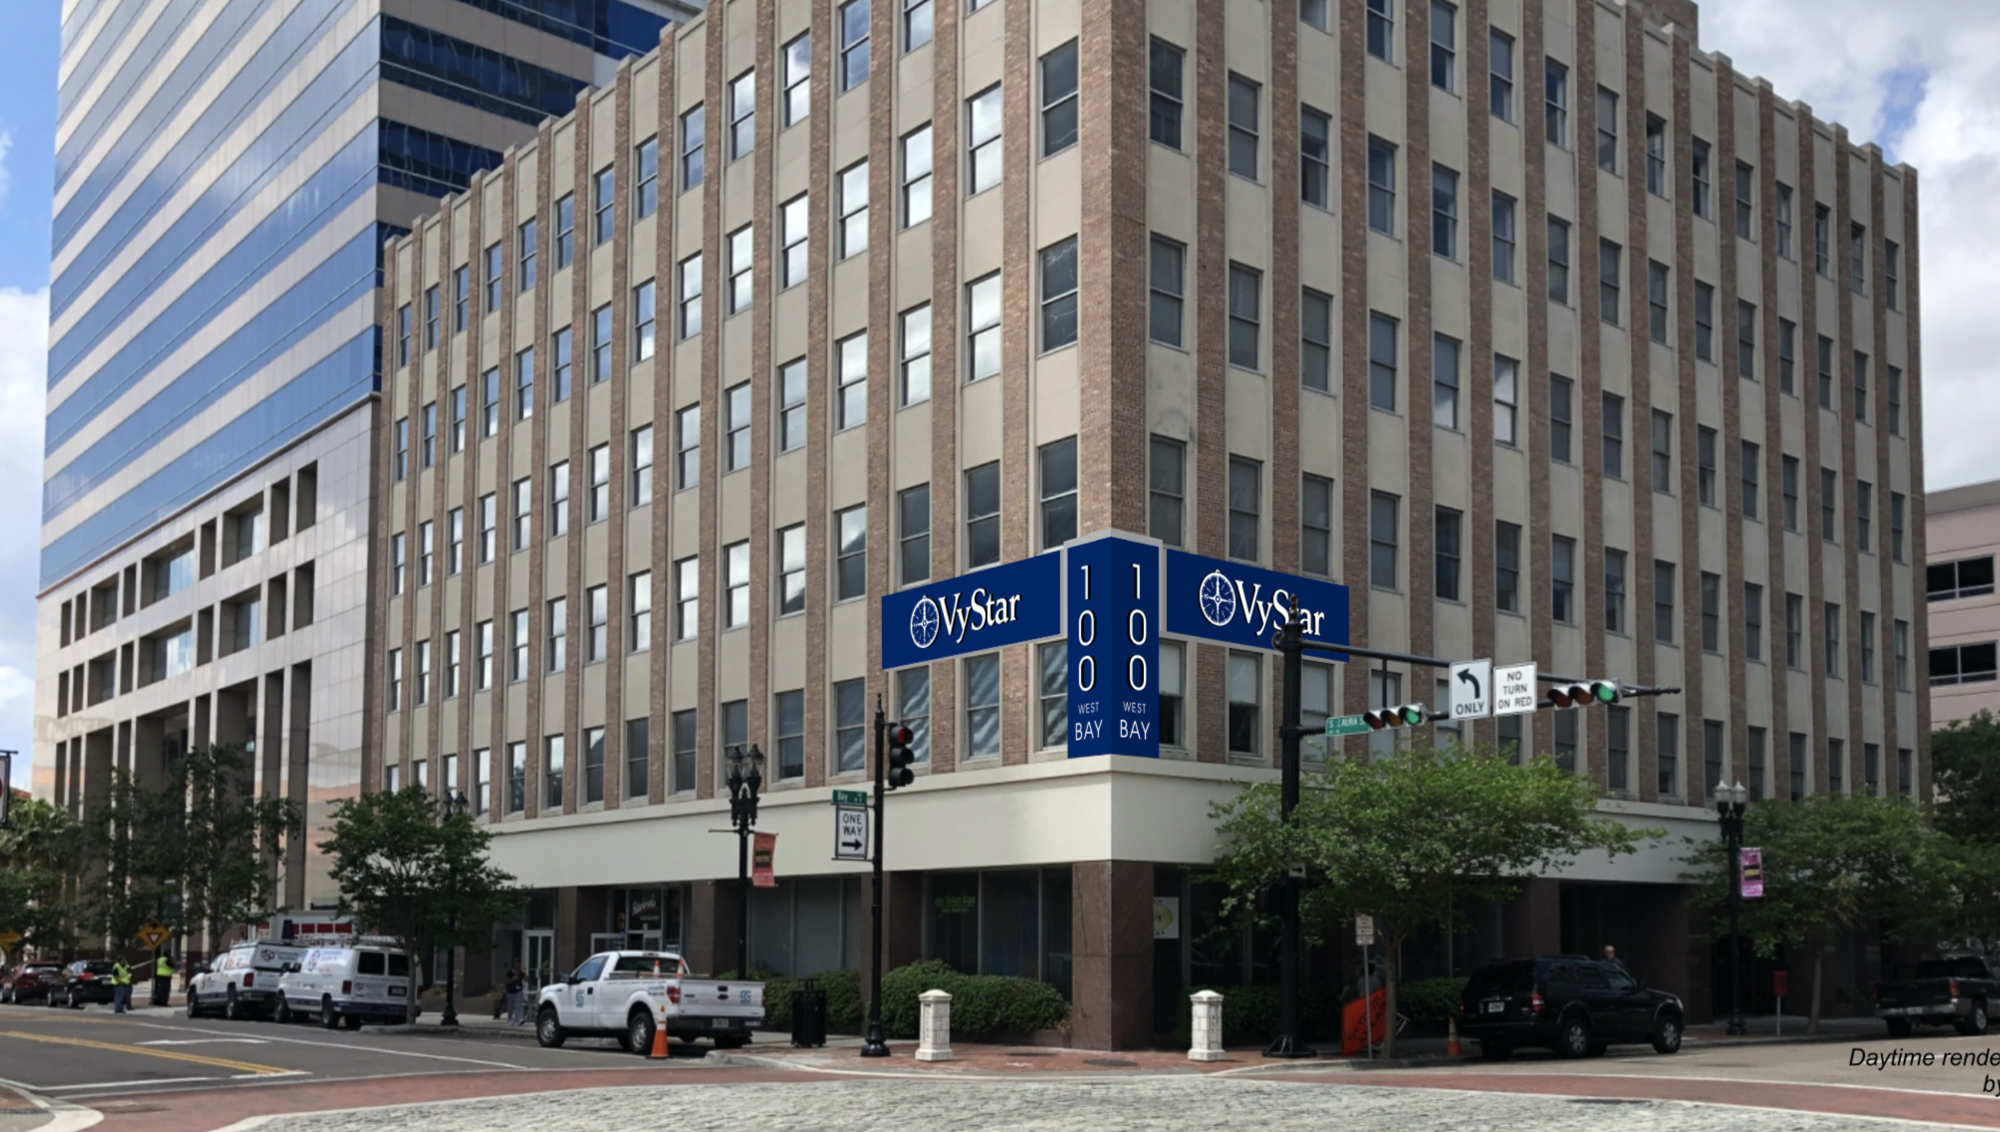 Jacksonville-based VyStar Credit Union bought the former Life of the South Building in February for $5 million.